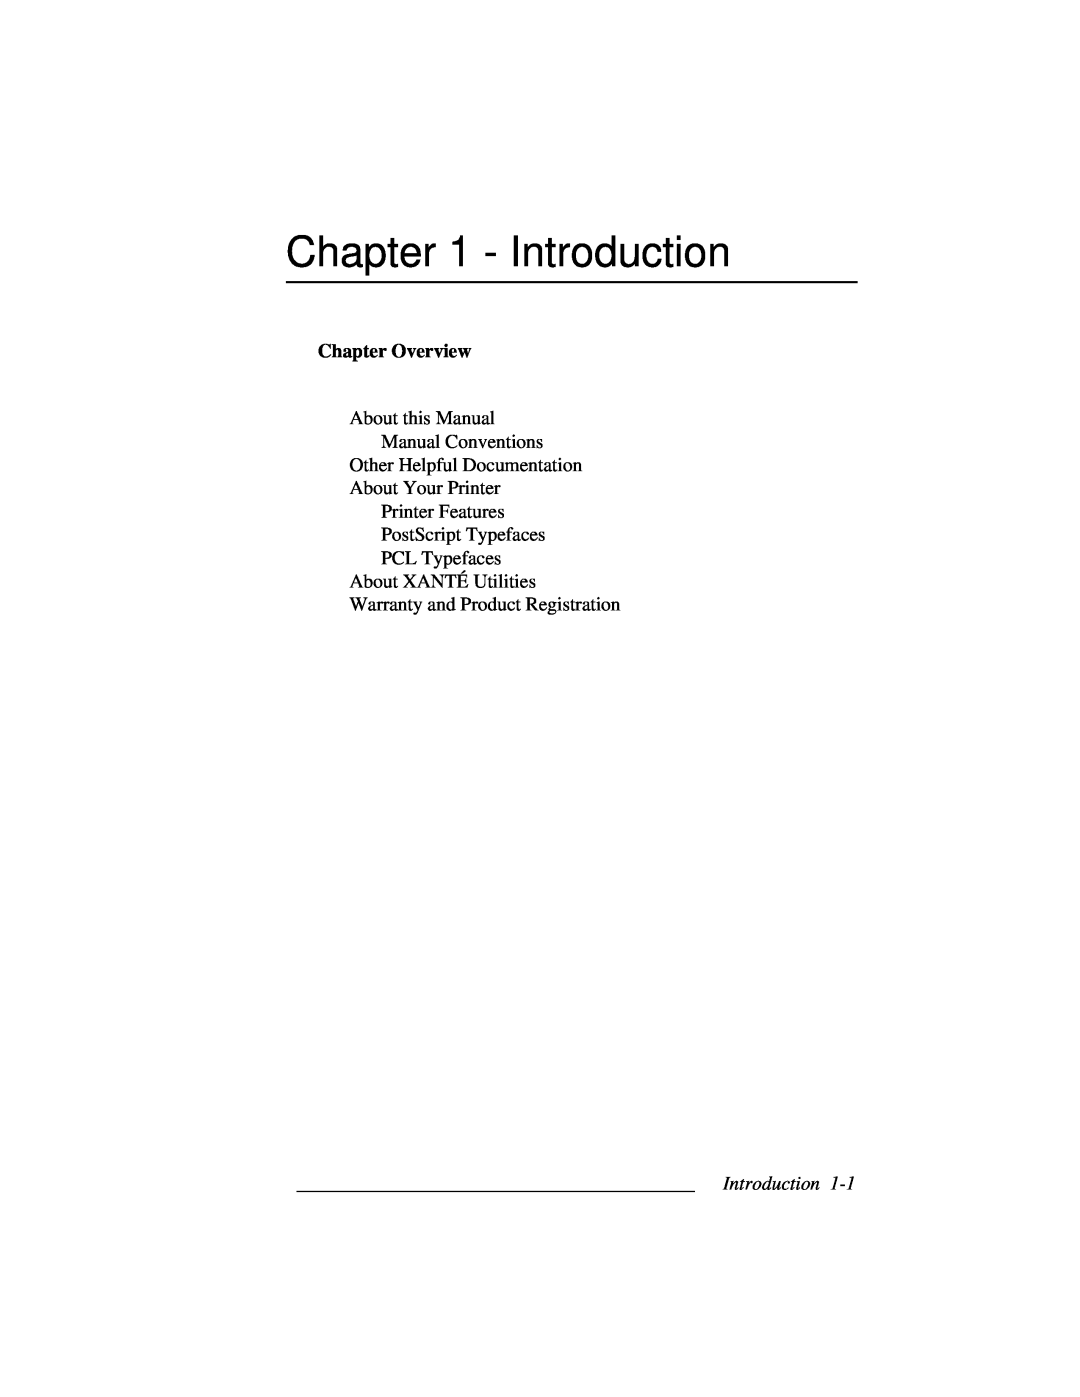 Accel 8200 manual Introduction, Chapter Overview 